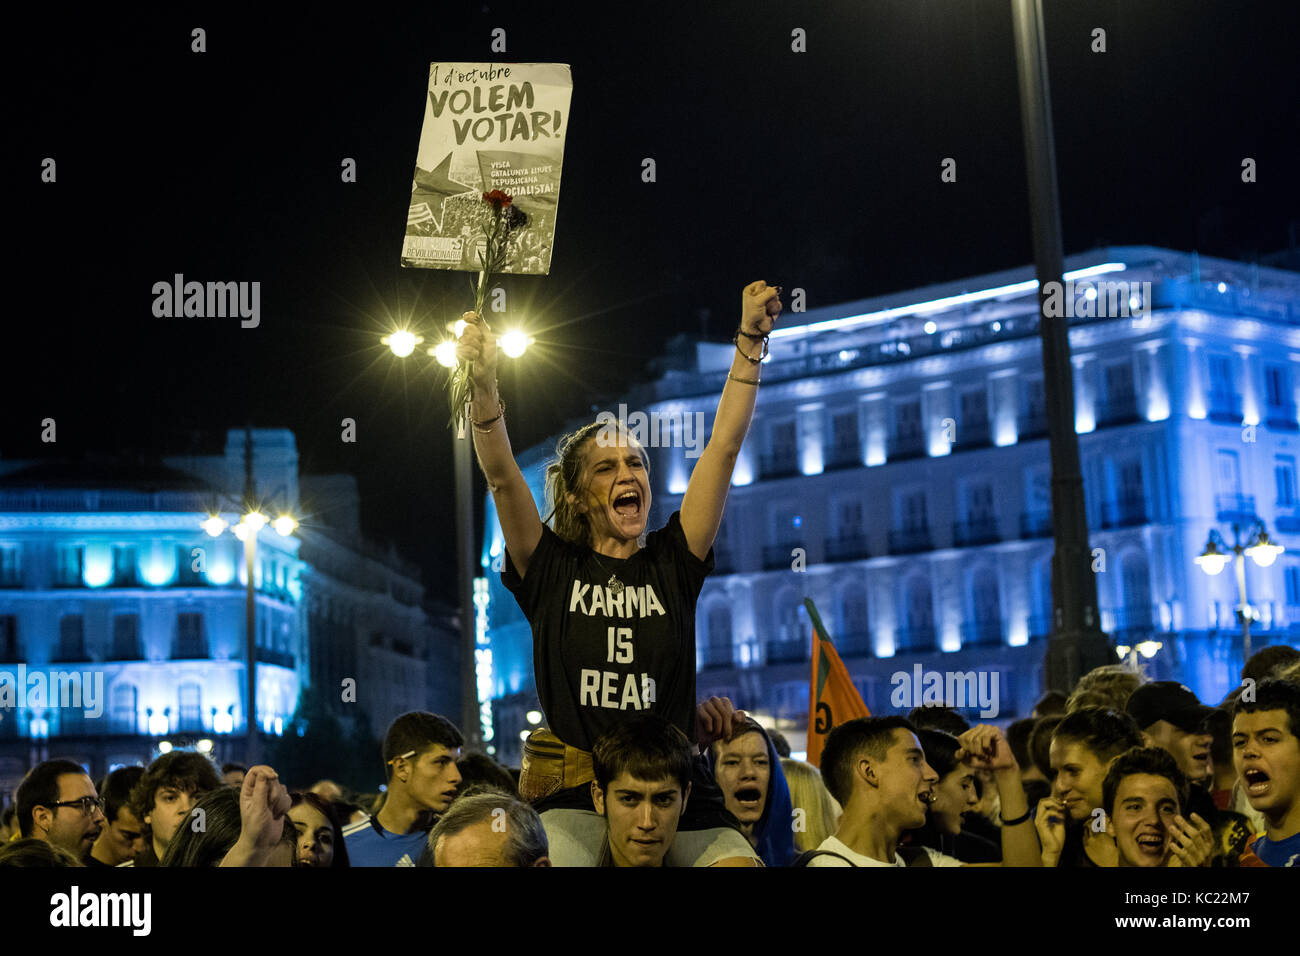 Madrid, Spain. 1st Oct. 2017. A woman holds a placard that reads 'We want to vote' during a protest supporting referendum in Catalonia. Madrid, Spain. Credit: Marcos del Mazo/Alamy Live News Stock Photo